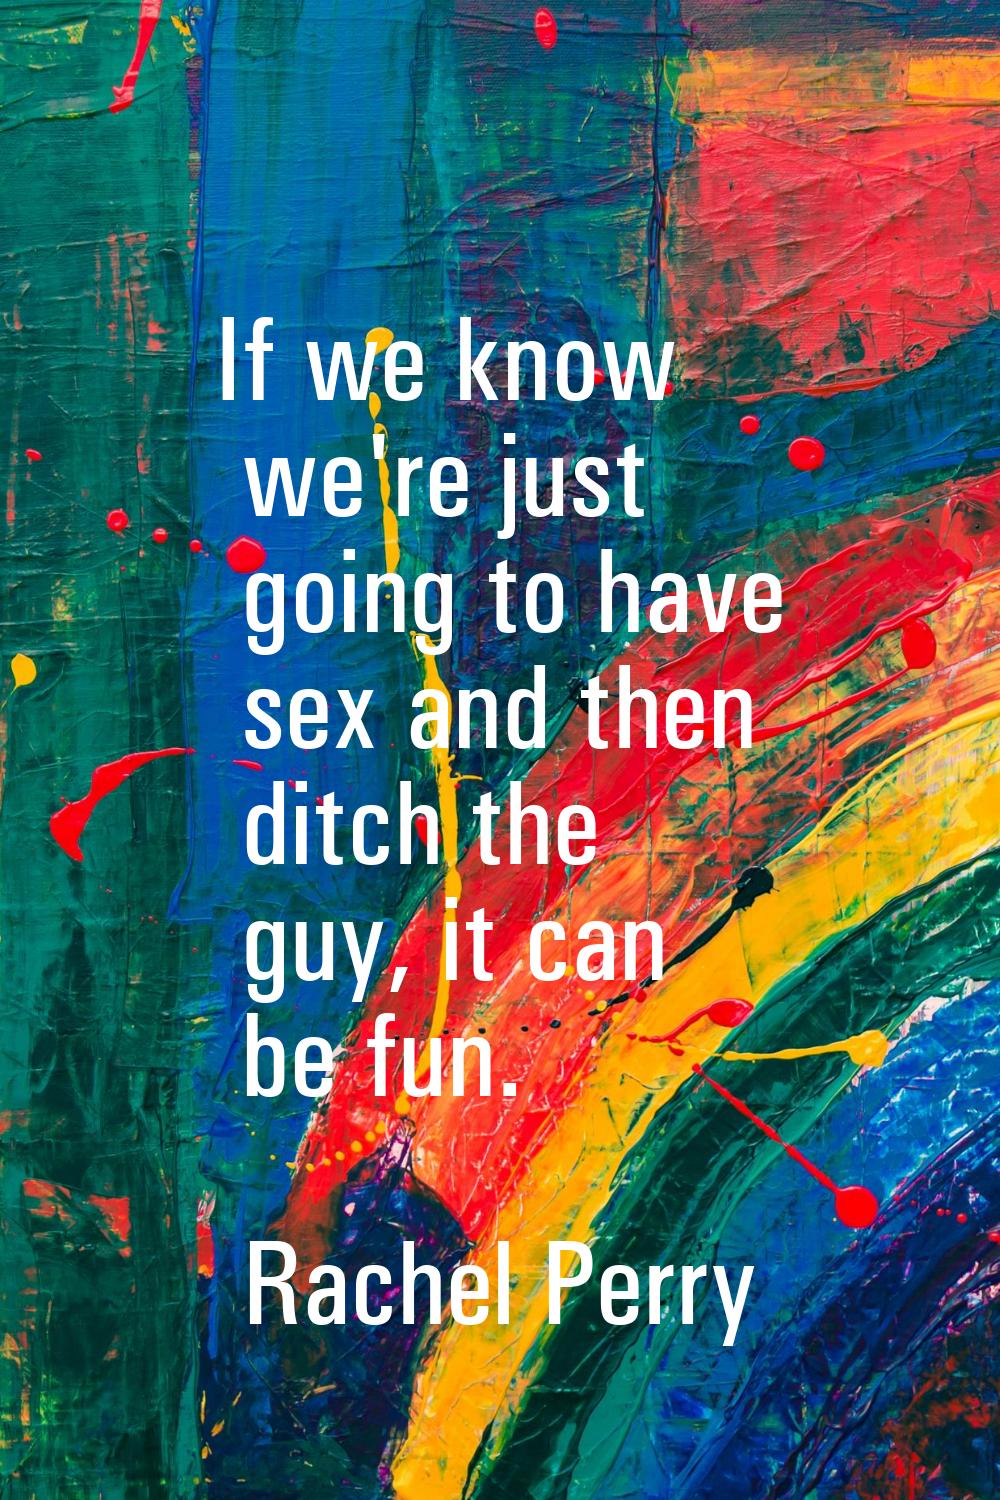 If we know we're just going to have sex and then ditch the guy, it can be fun.